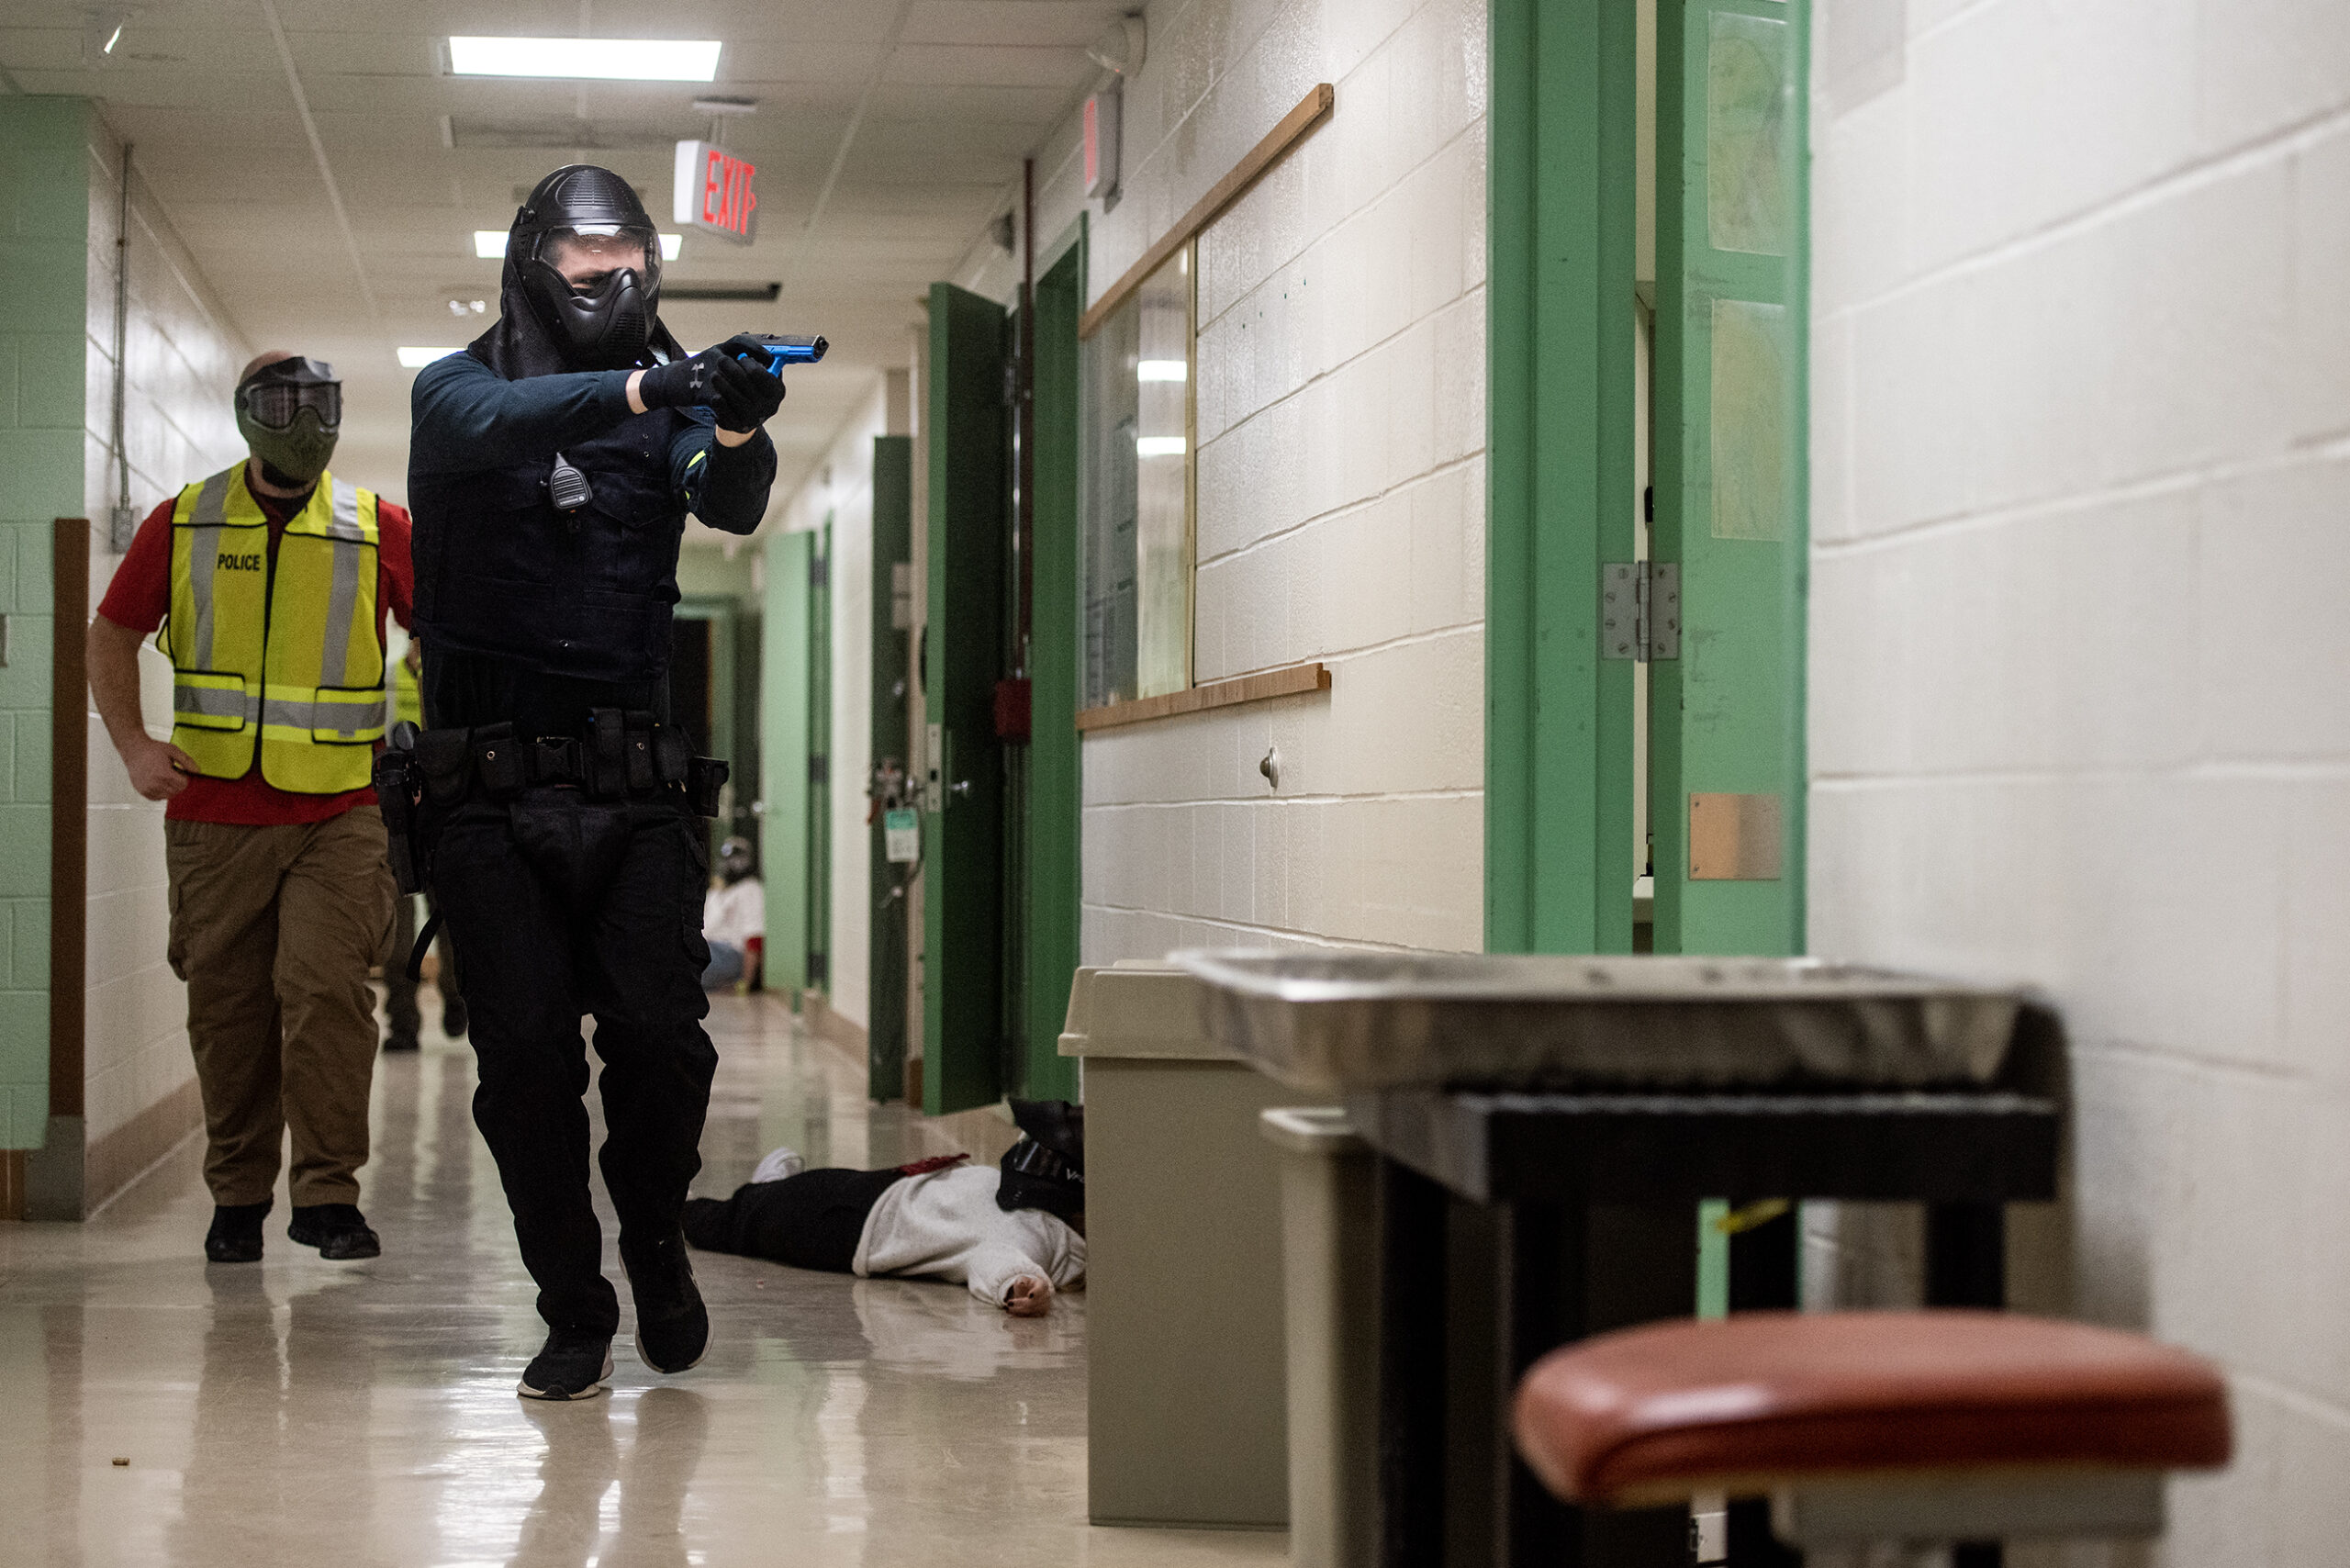 An officer moves through a school hallway holding a fake weapon during a simulated training exercise.